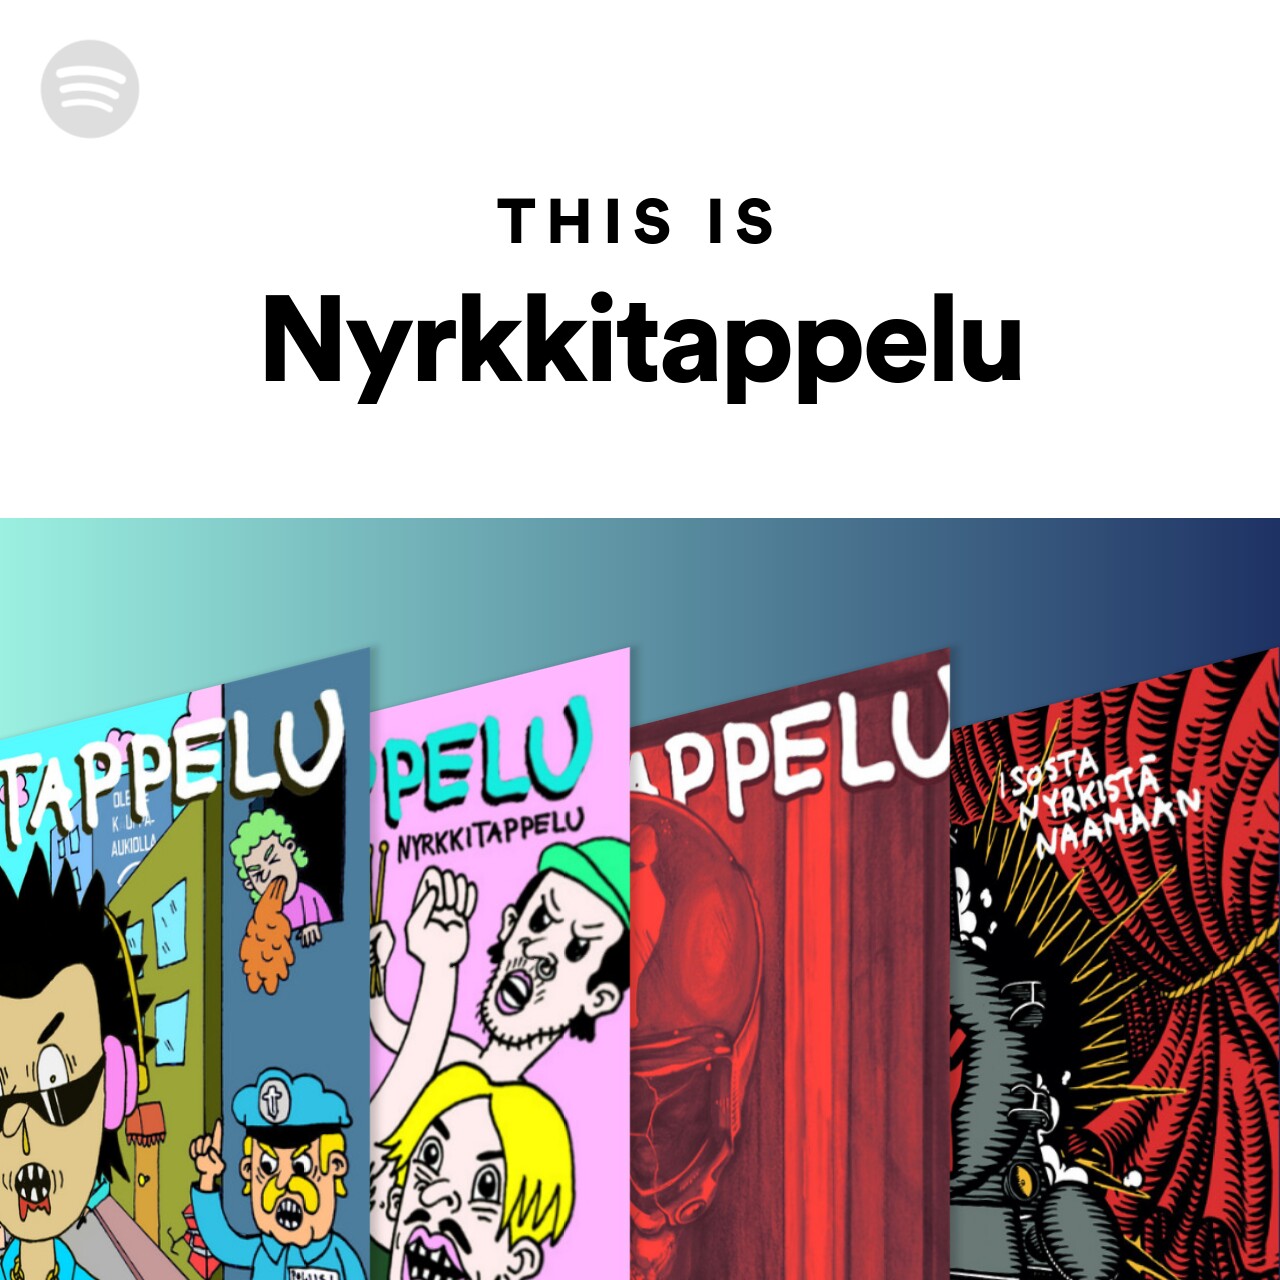 This Is Nyrkkitappelu